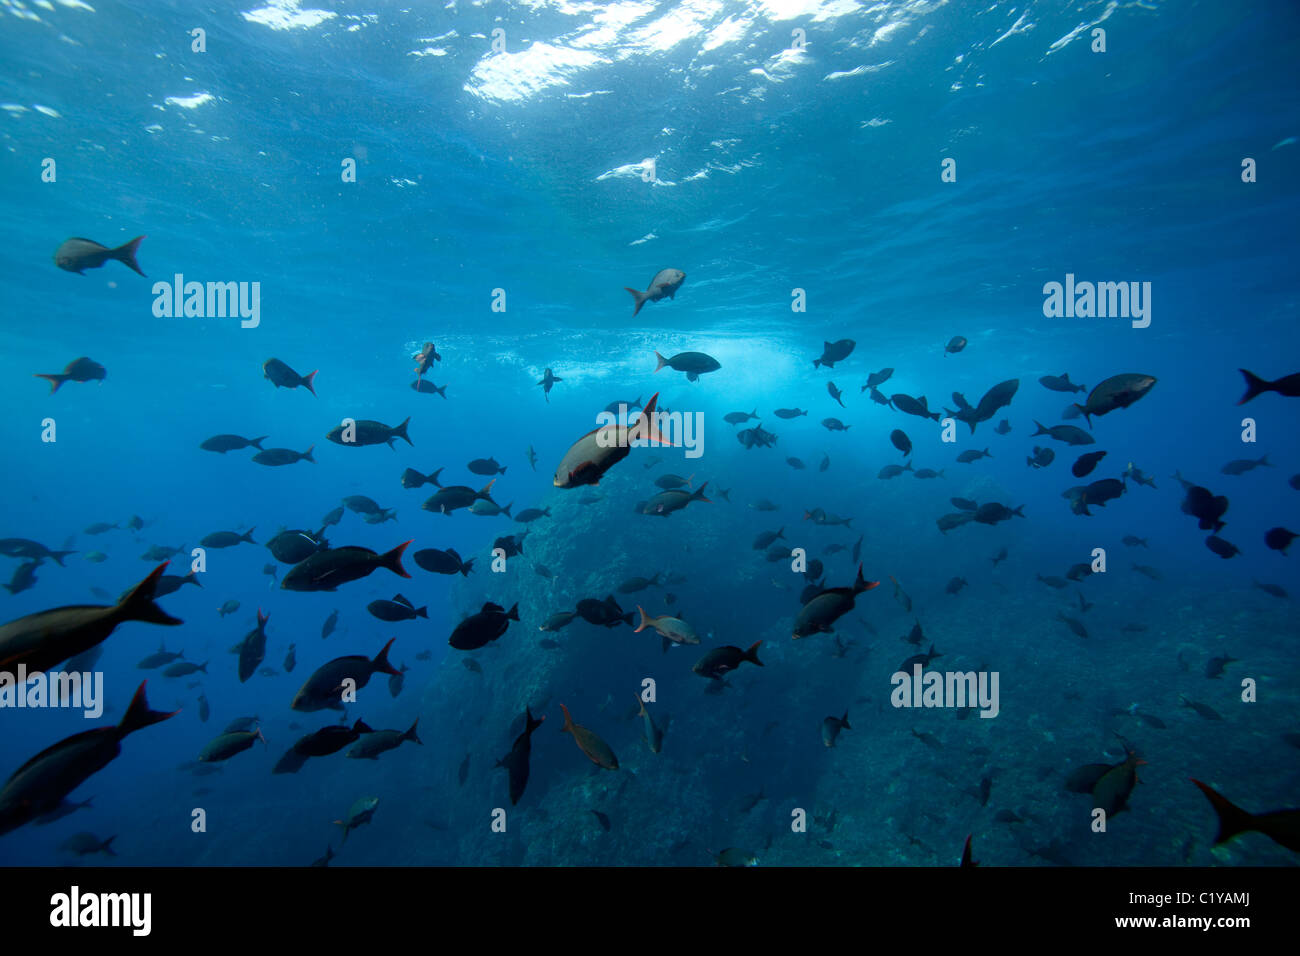 Tropical fish abound at the Shark Fin Rock Dive Site off of Cocos Island off the coast of Costa Rica. Stock Photo